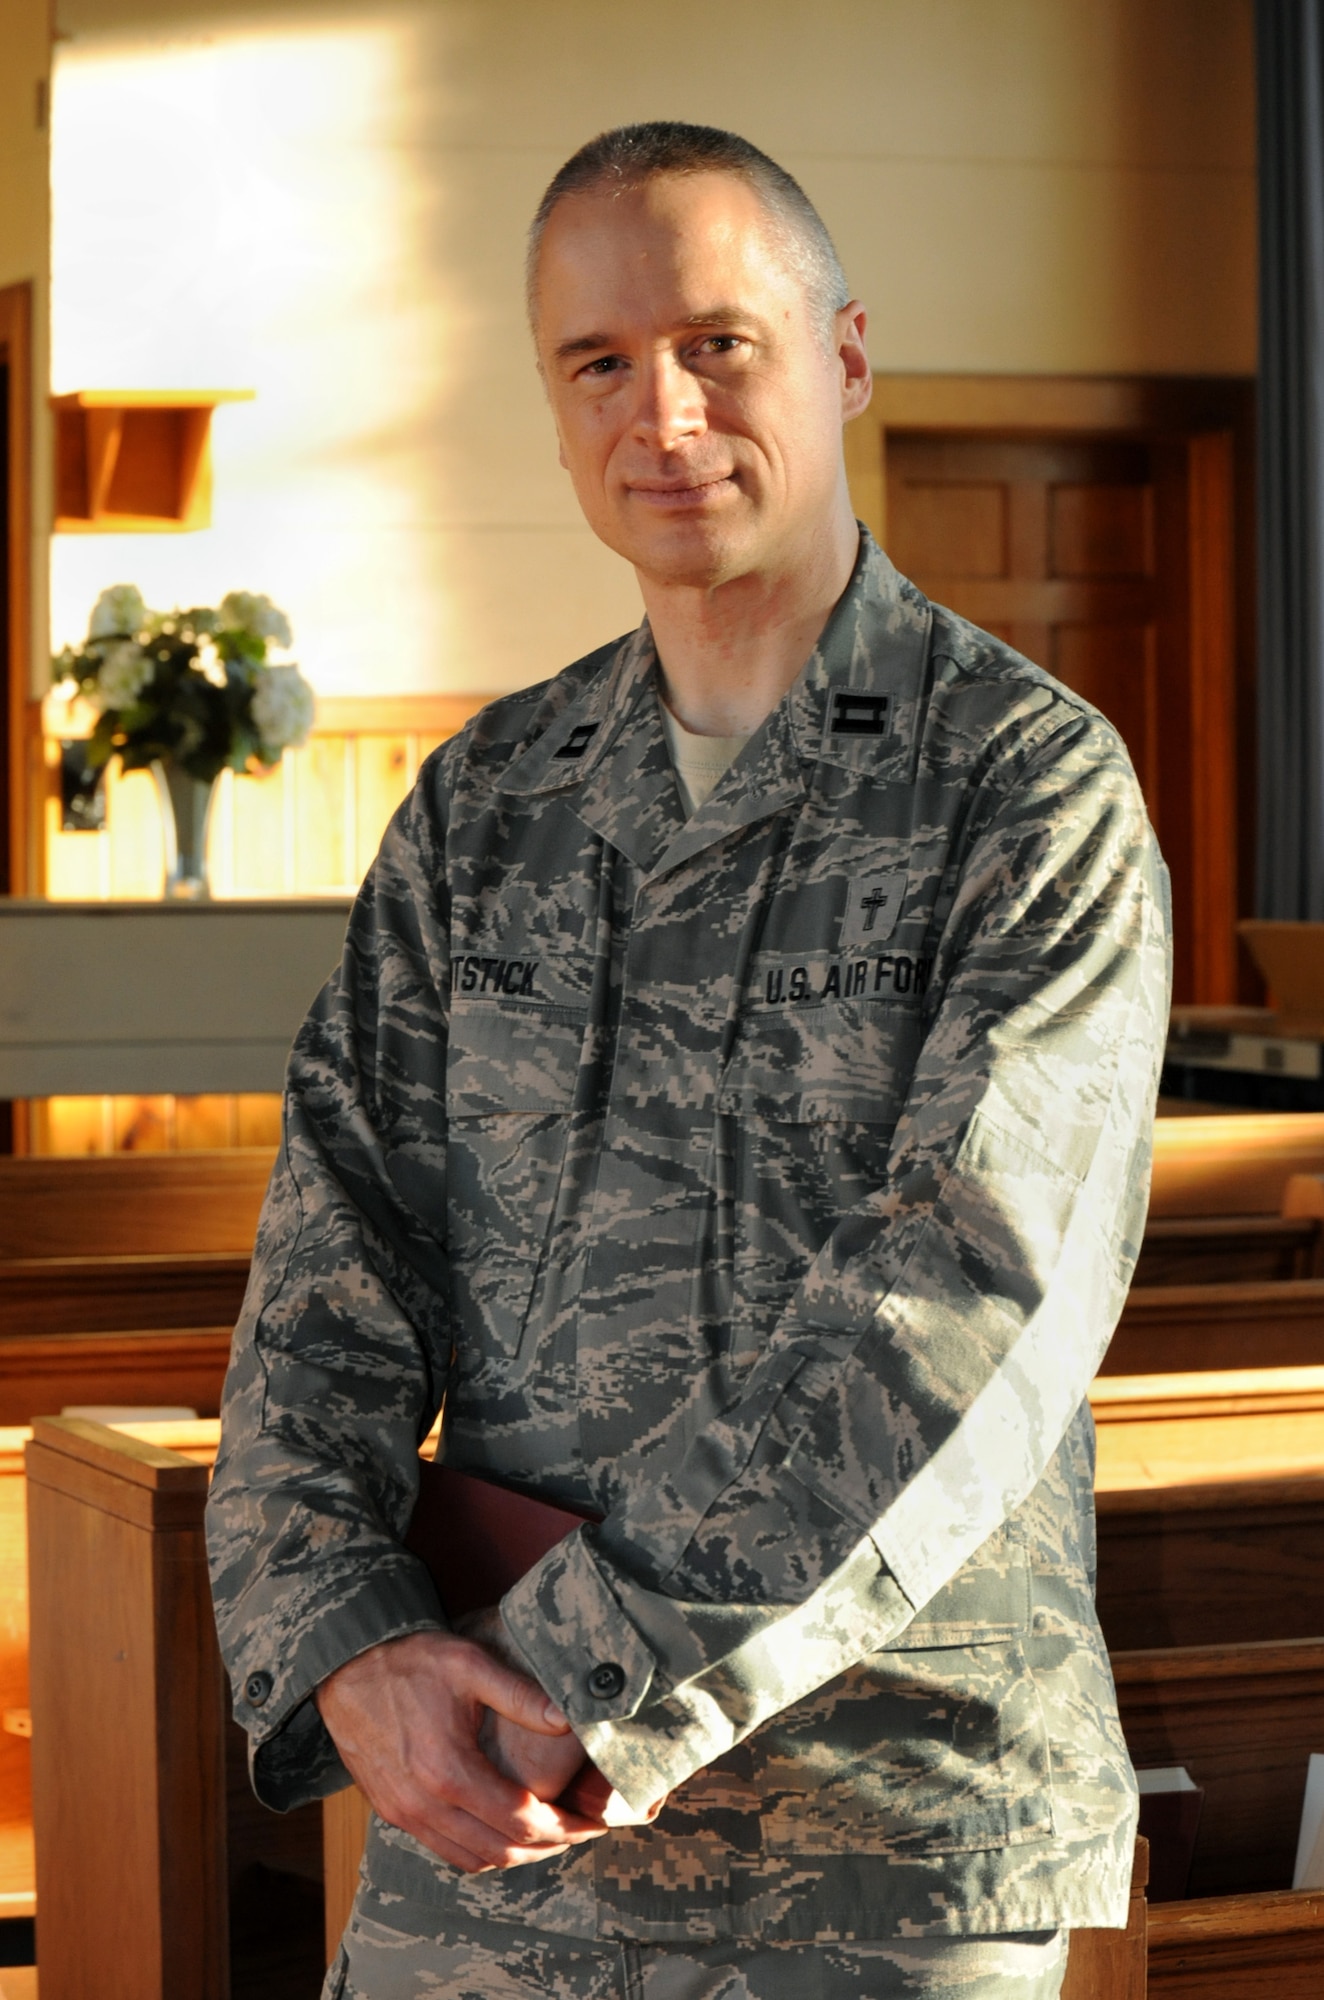 Oregon Air National Guard Chaplain (Capt.) Rory Pitstick, assigned to the 142nd Fighter Wing, pauses for a photograph at the base chapel following Catholic Mass, Jan. 10, 2016. Pitstick is part of the 142nd Fighter Wing’s new emphasis of courses and activities under the Comprehensive Airmen Fitness program, designed to focus on Airmen and their families' physical, social, mental and spiritual wellness. (U.S. Air National Guard photo by Tech. Sgt. John Hughel, 142nd Fighter Wing Public Affairs/released)